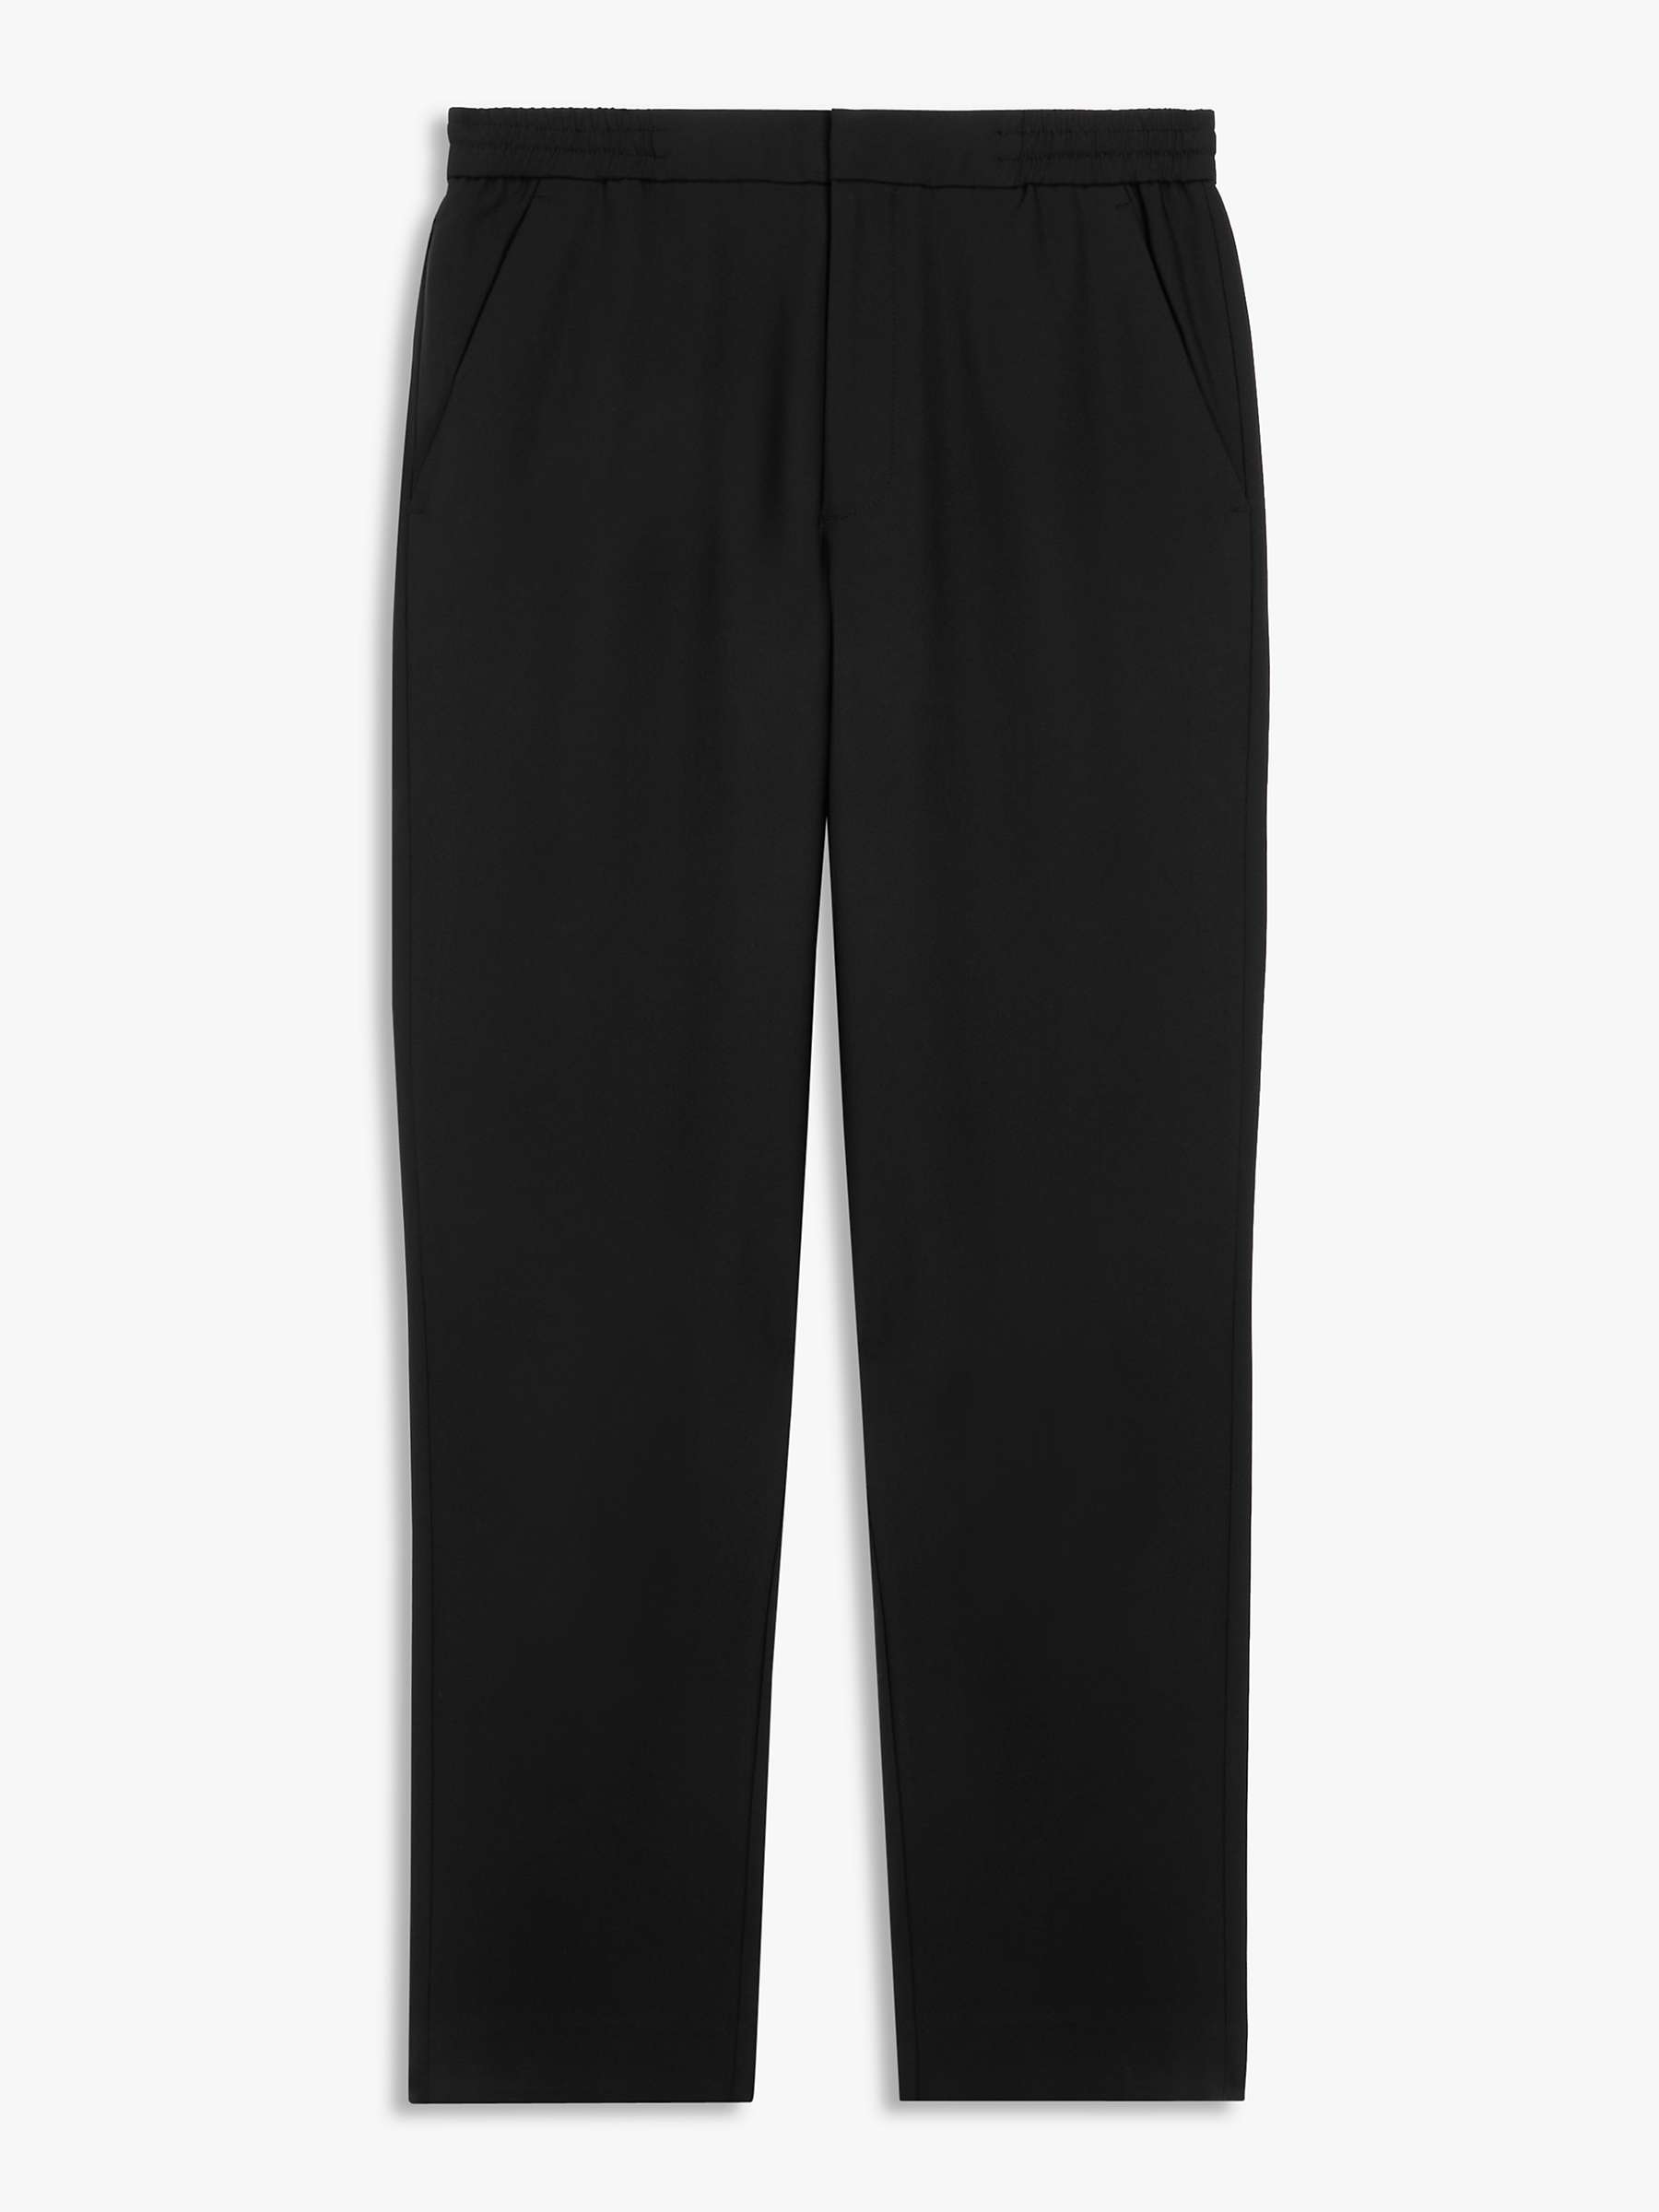 Kin Twill Easy Straight Fit Trousers, Black Beauty at John Lewis & Partners